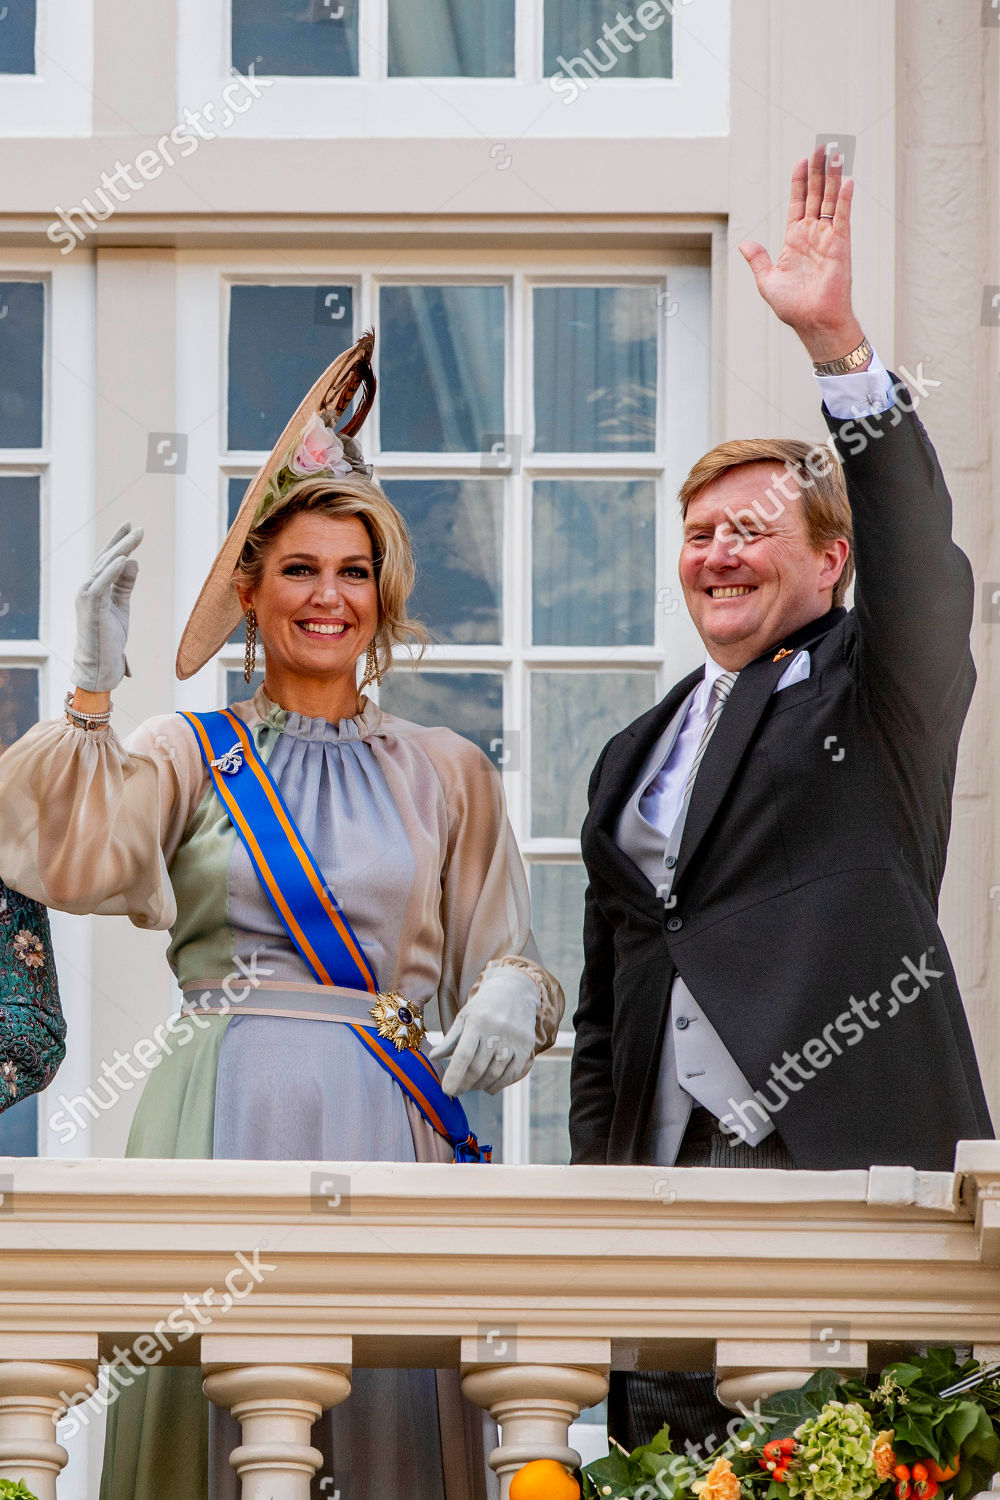 opening-of-the-parliamentary-season-the-hague-the-netherlands-shutterstock-editorial-9885898o.jpg